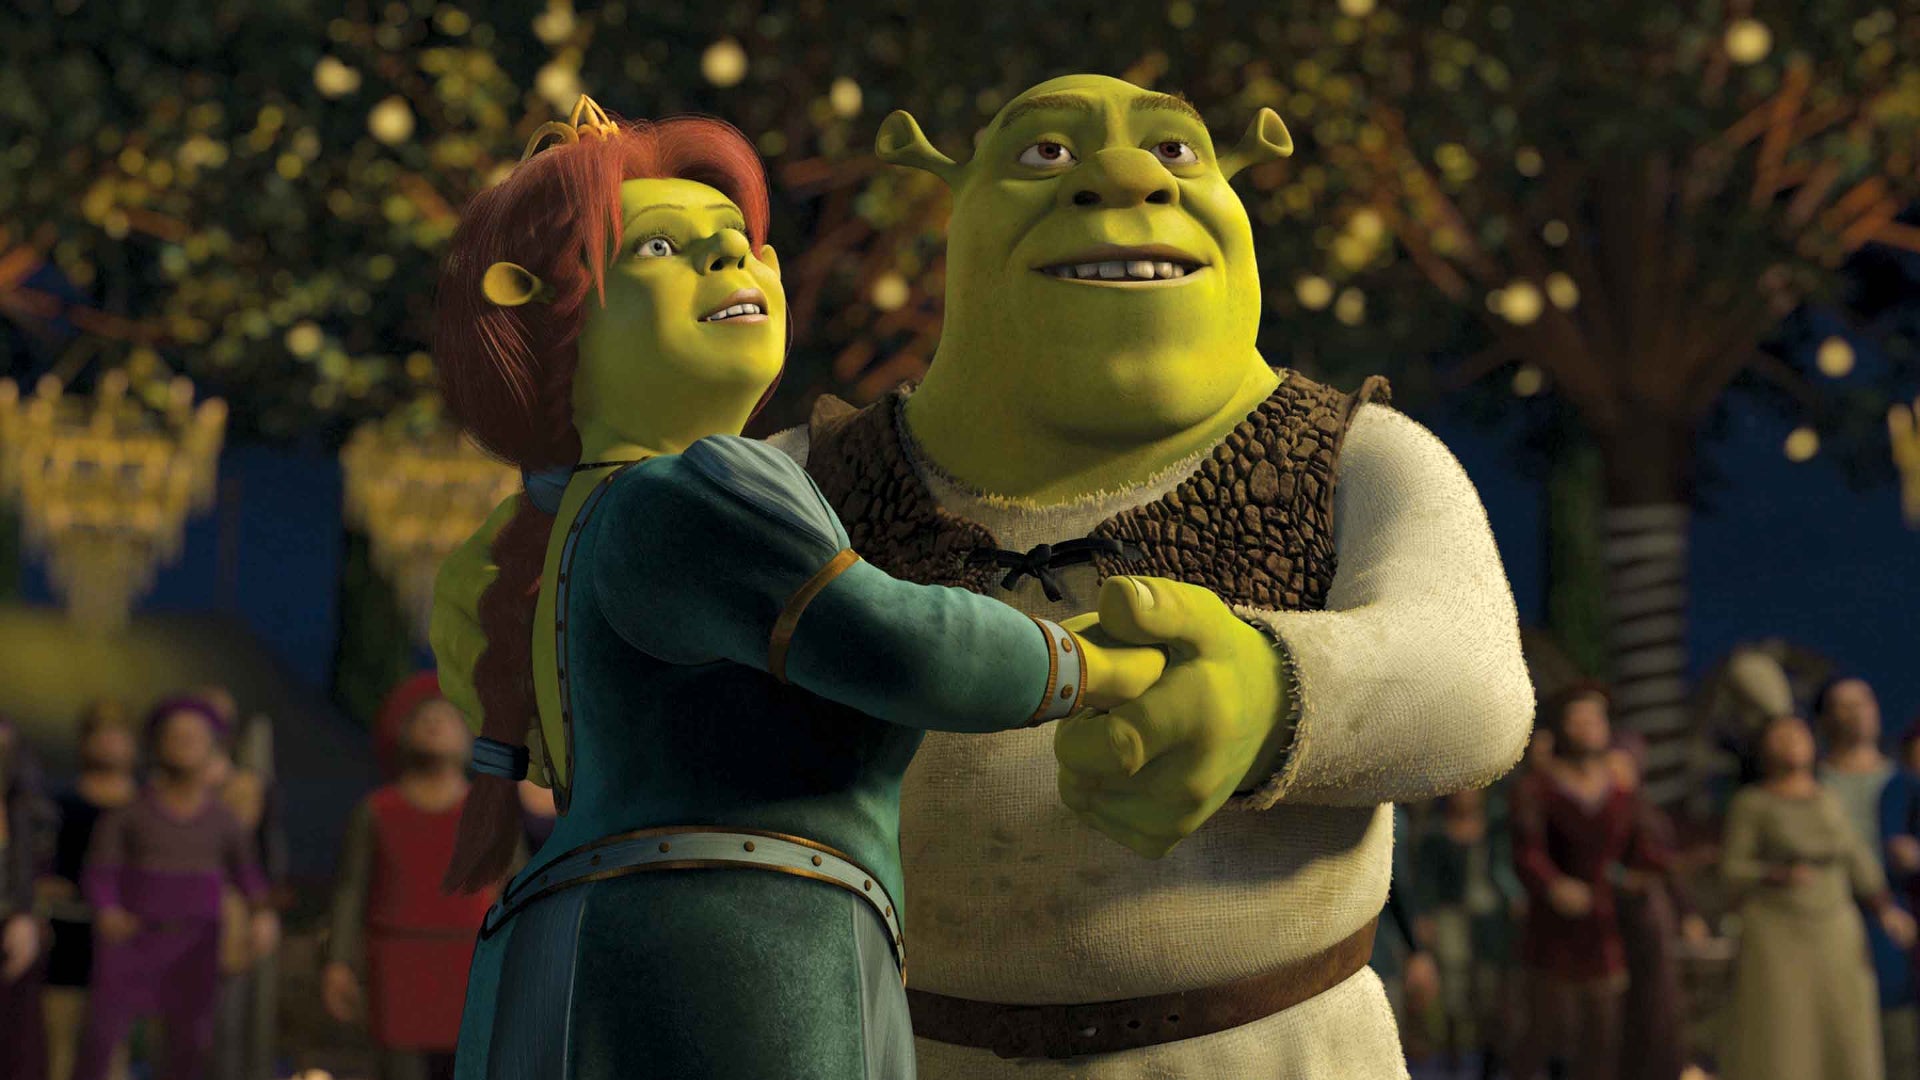 The Best Shrek Movie Is Returning to Theaters for Its 20th Anniversary